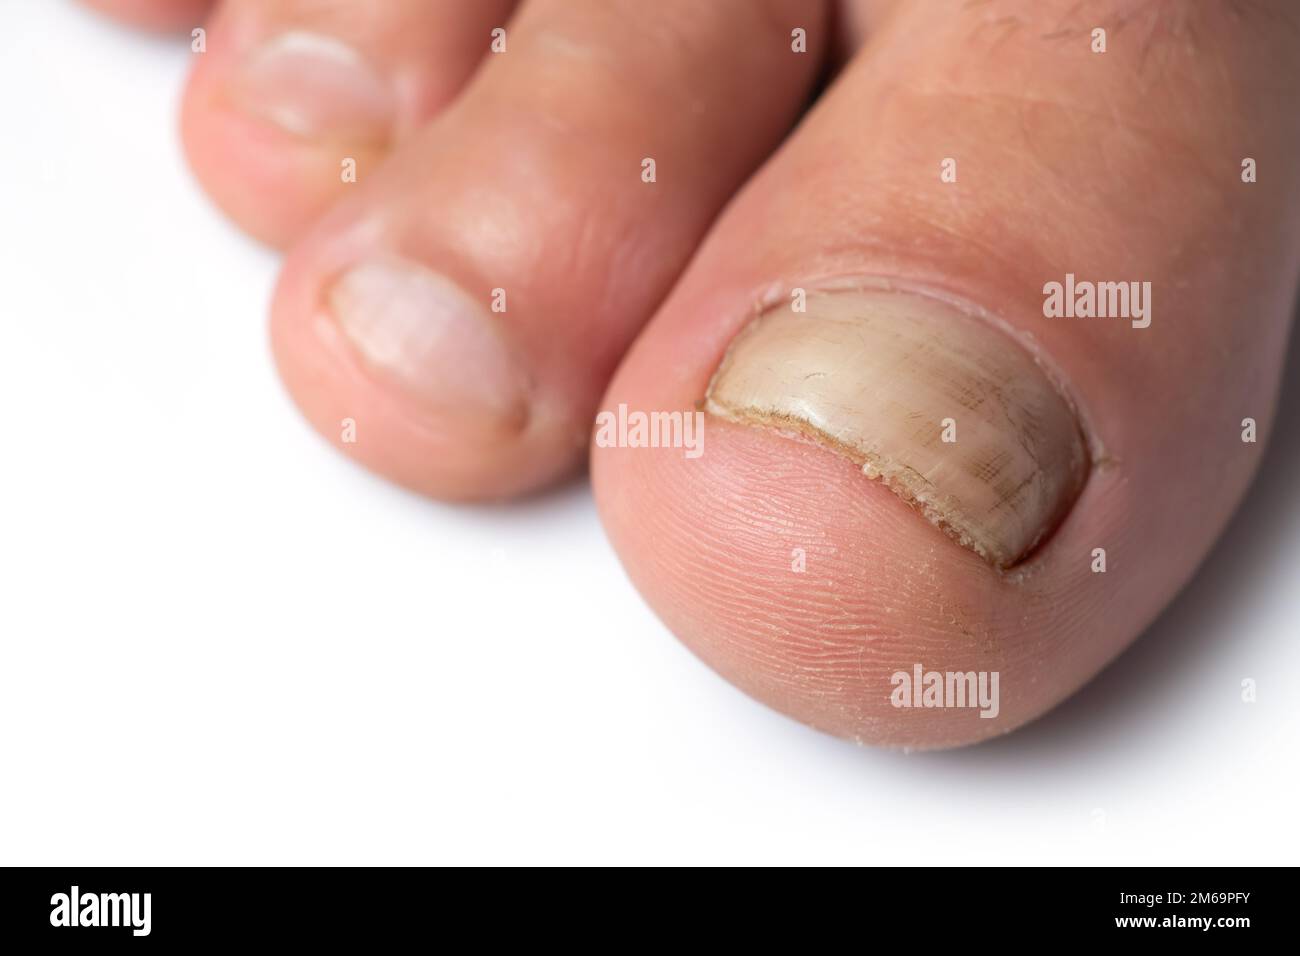 PDF) Non-Dermatophyte Moulds as Pathogens of Onychomycosis